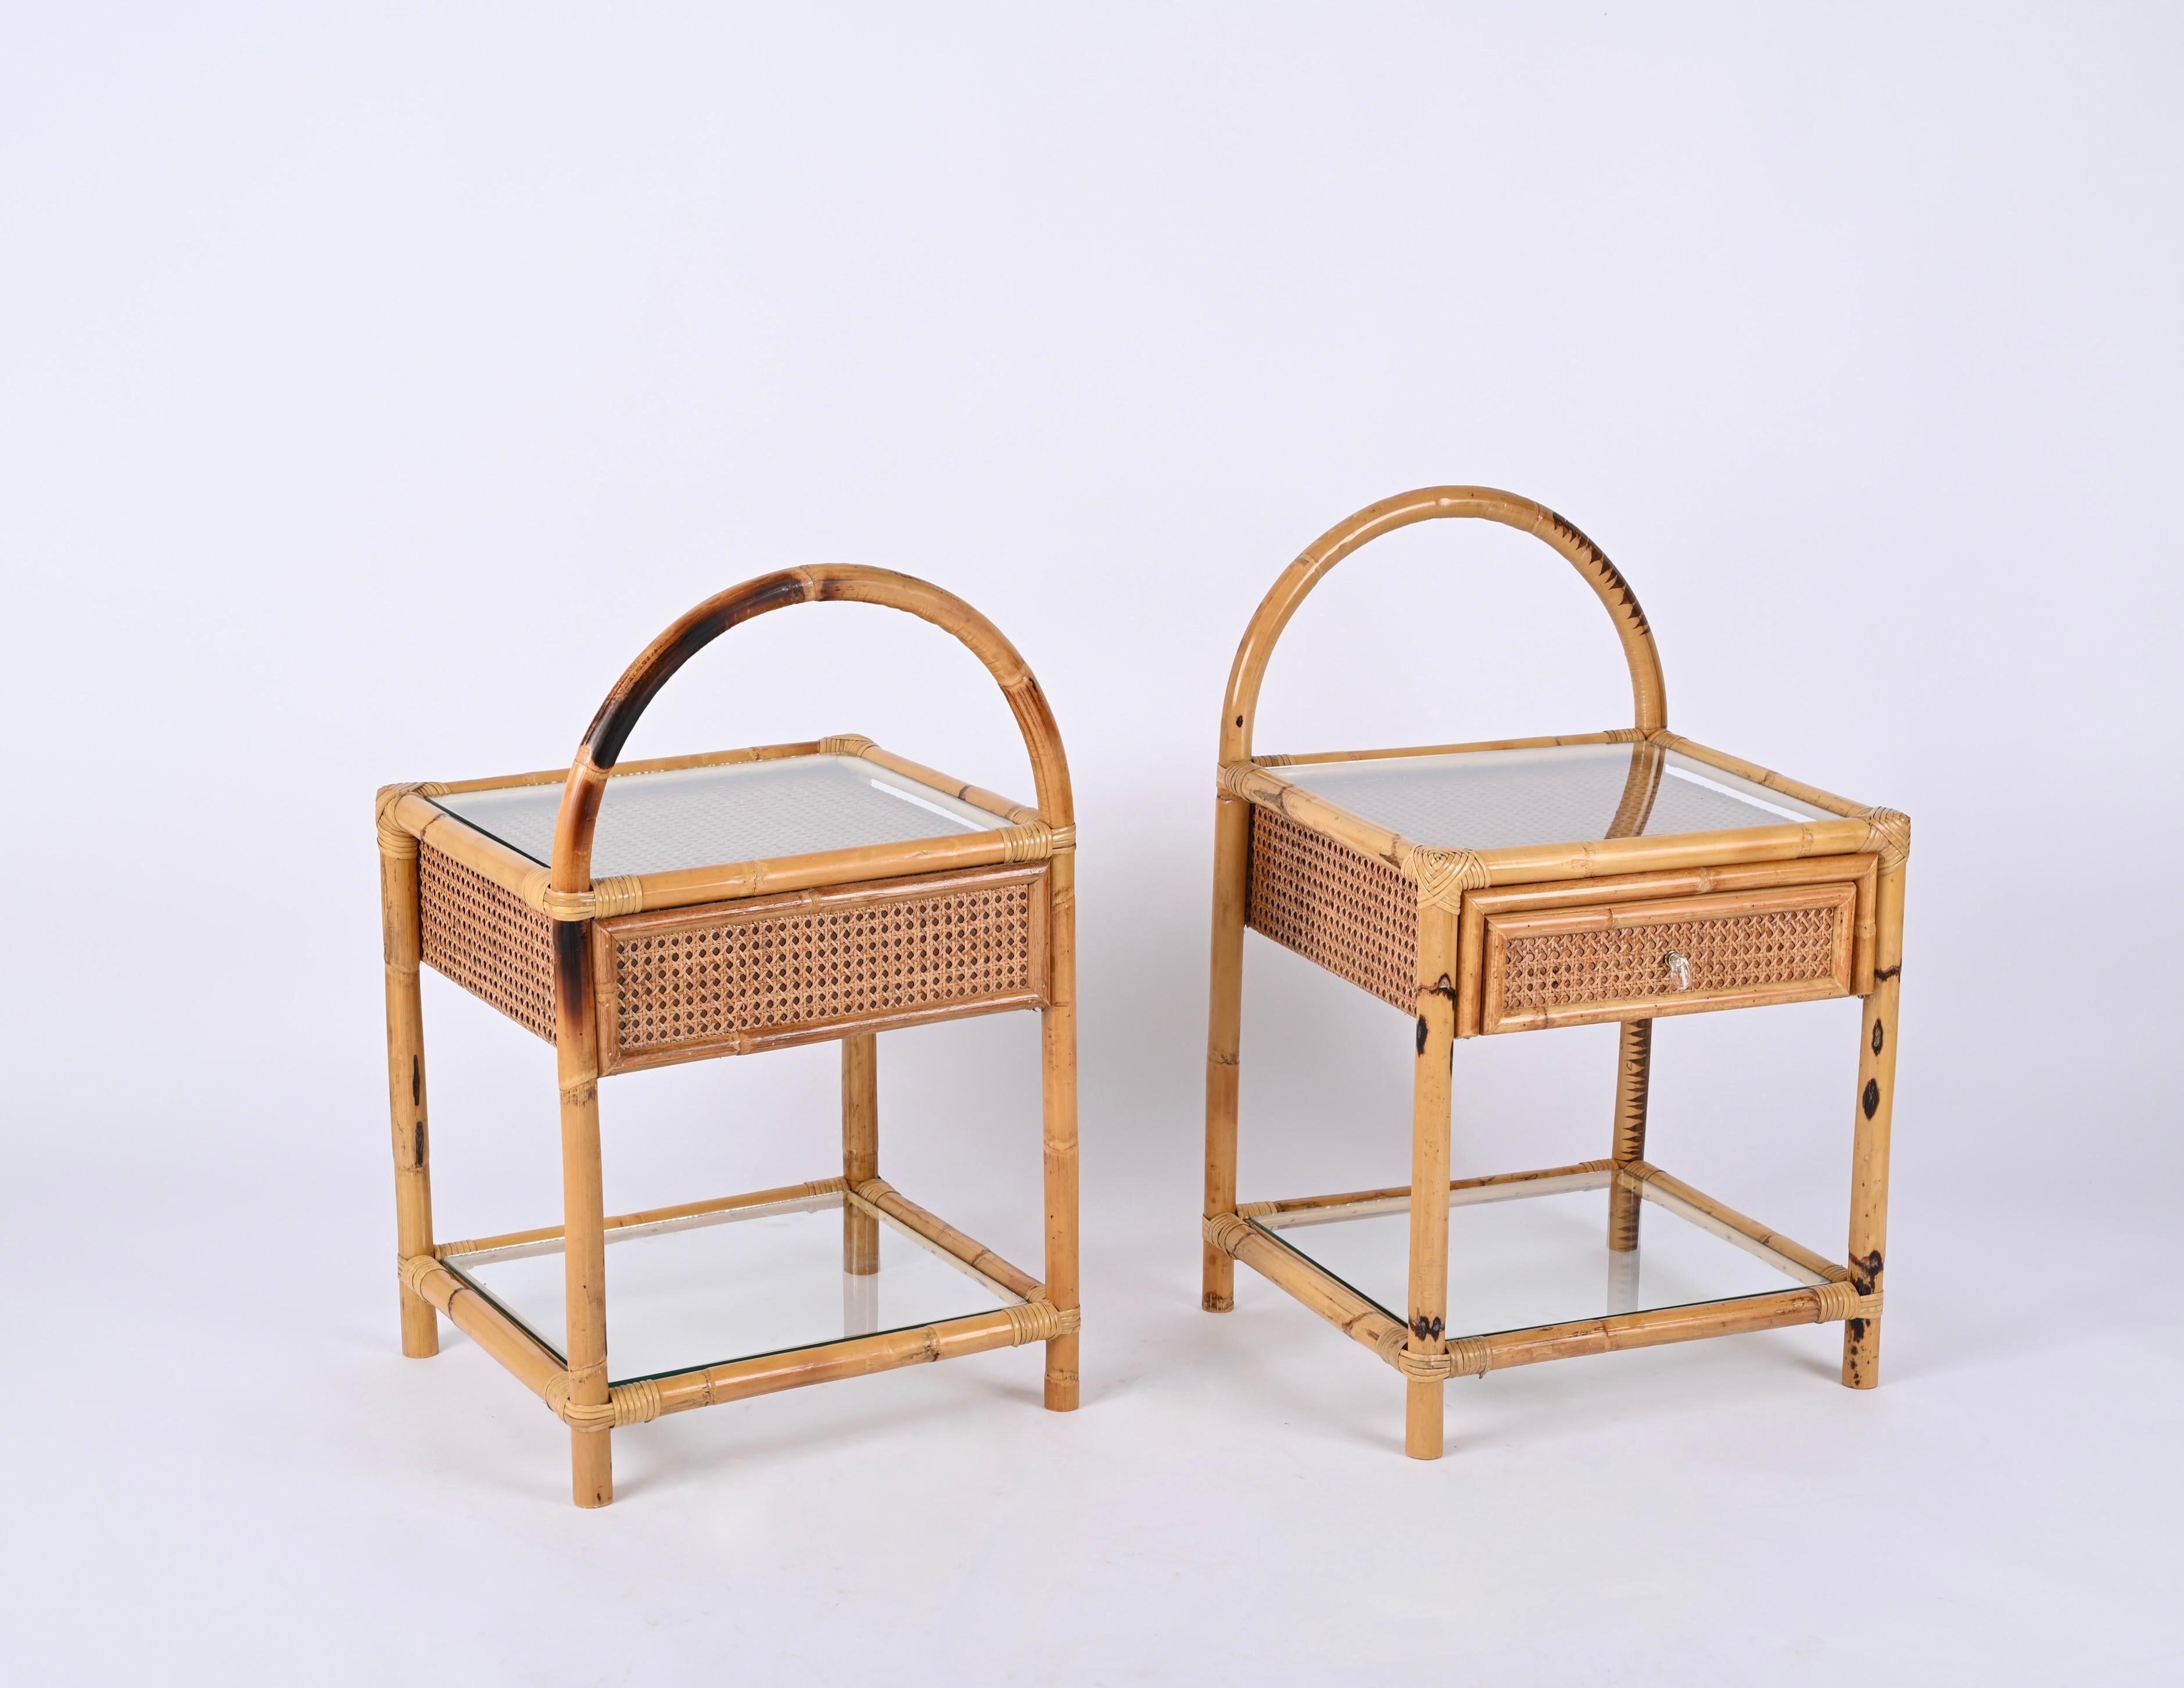 Pair of Mid-Century Bamboo, Rattan and Wicker Italian Bedside Tables, 1970s For Sale 2